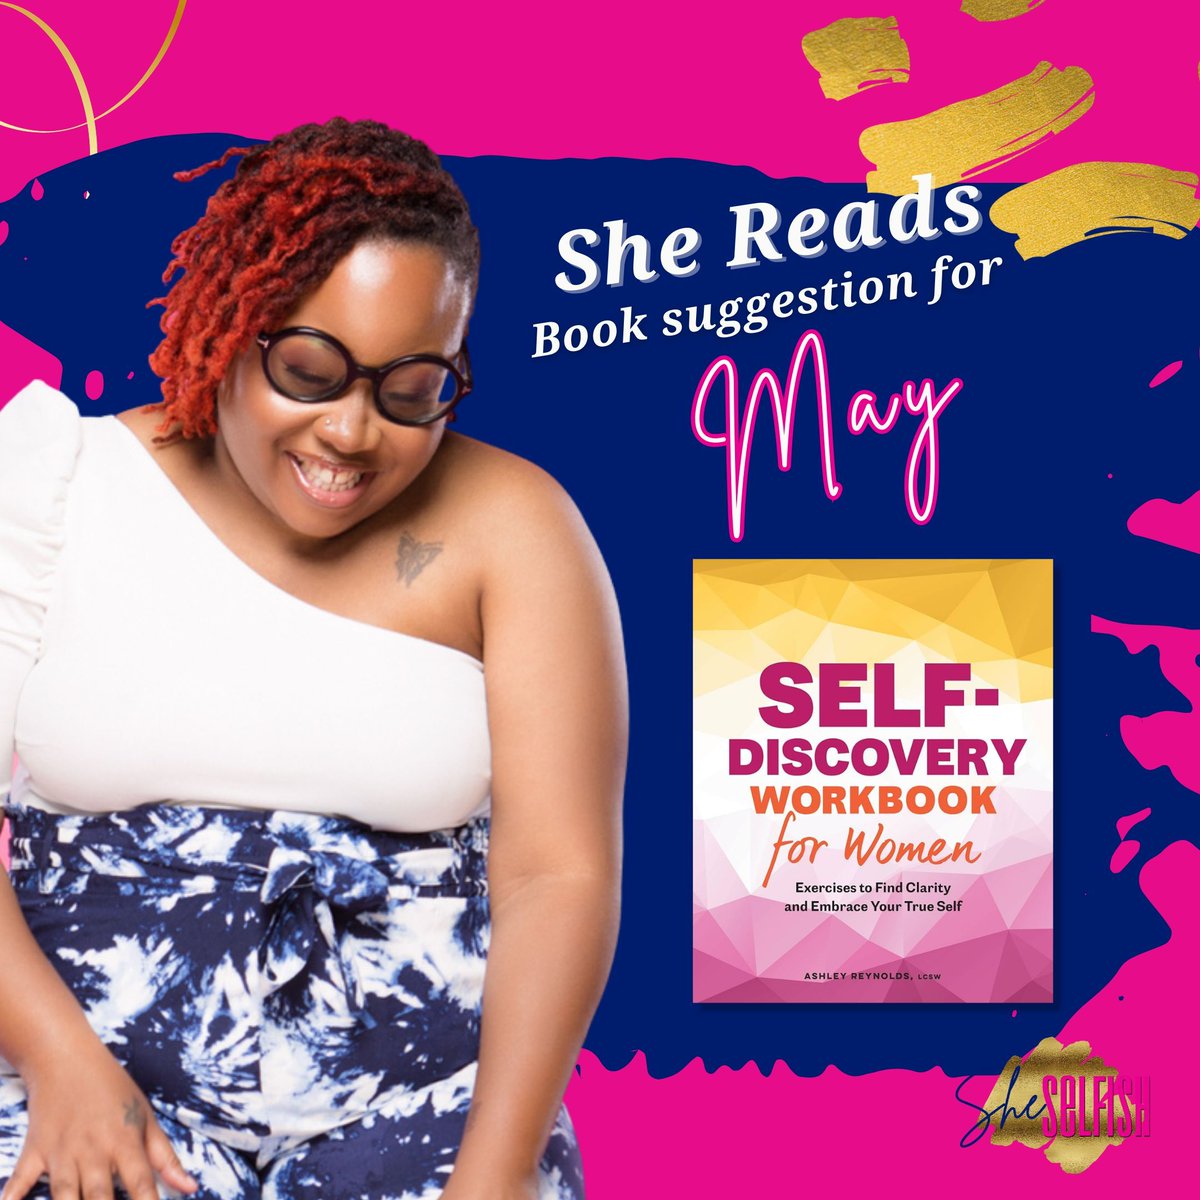 Sis! Dive into the Self-Discovery Workbook for Women and embark on a journey of empowerment and personal growth! 📚 

#SheReads #SelfDiscovery #selfcare #womenofcolor #practiceselfcare #selfdiscovery #blackwomen #blackgirlmagic #blackwoman